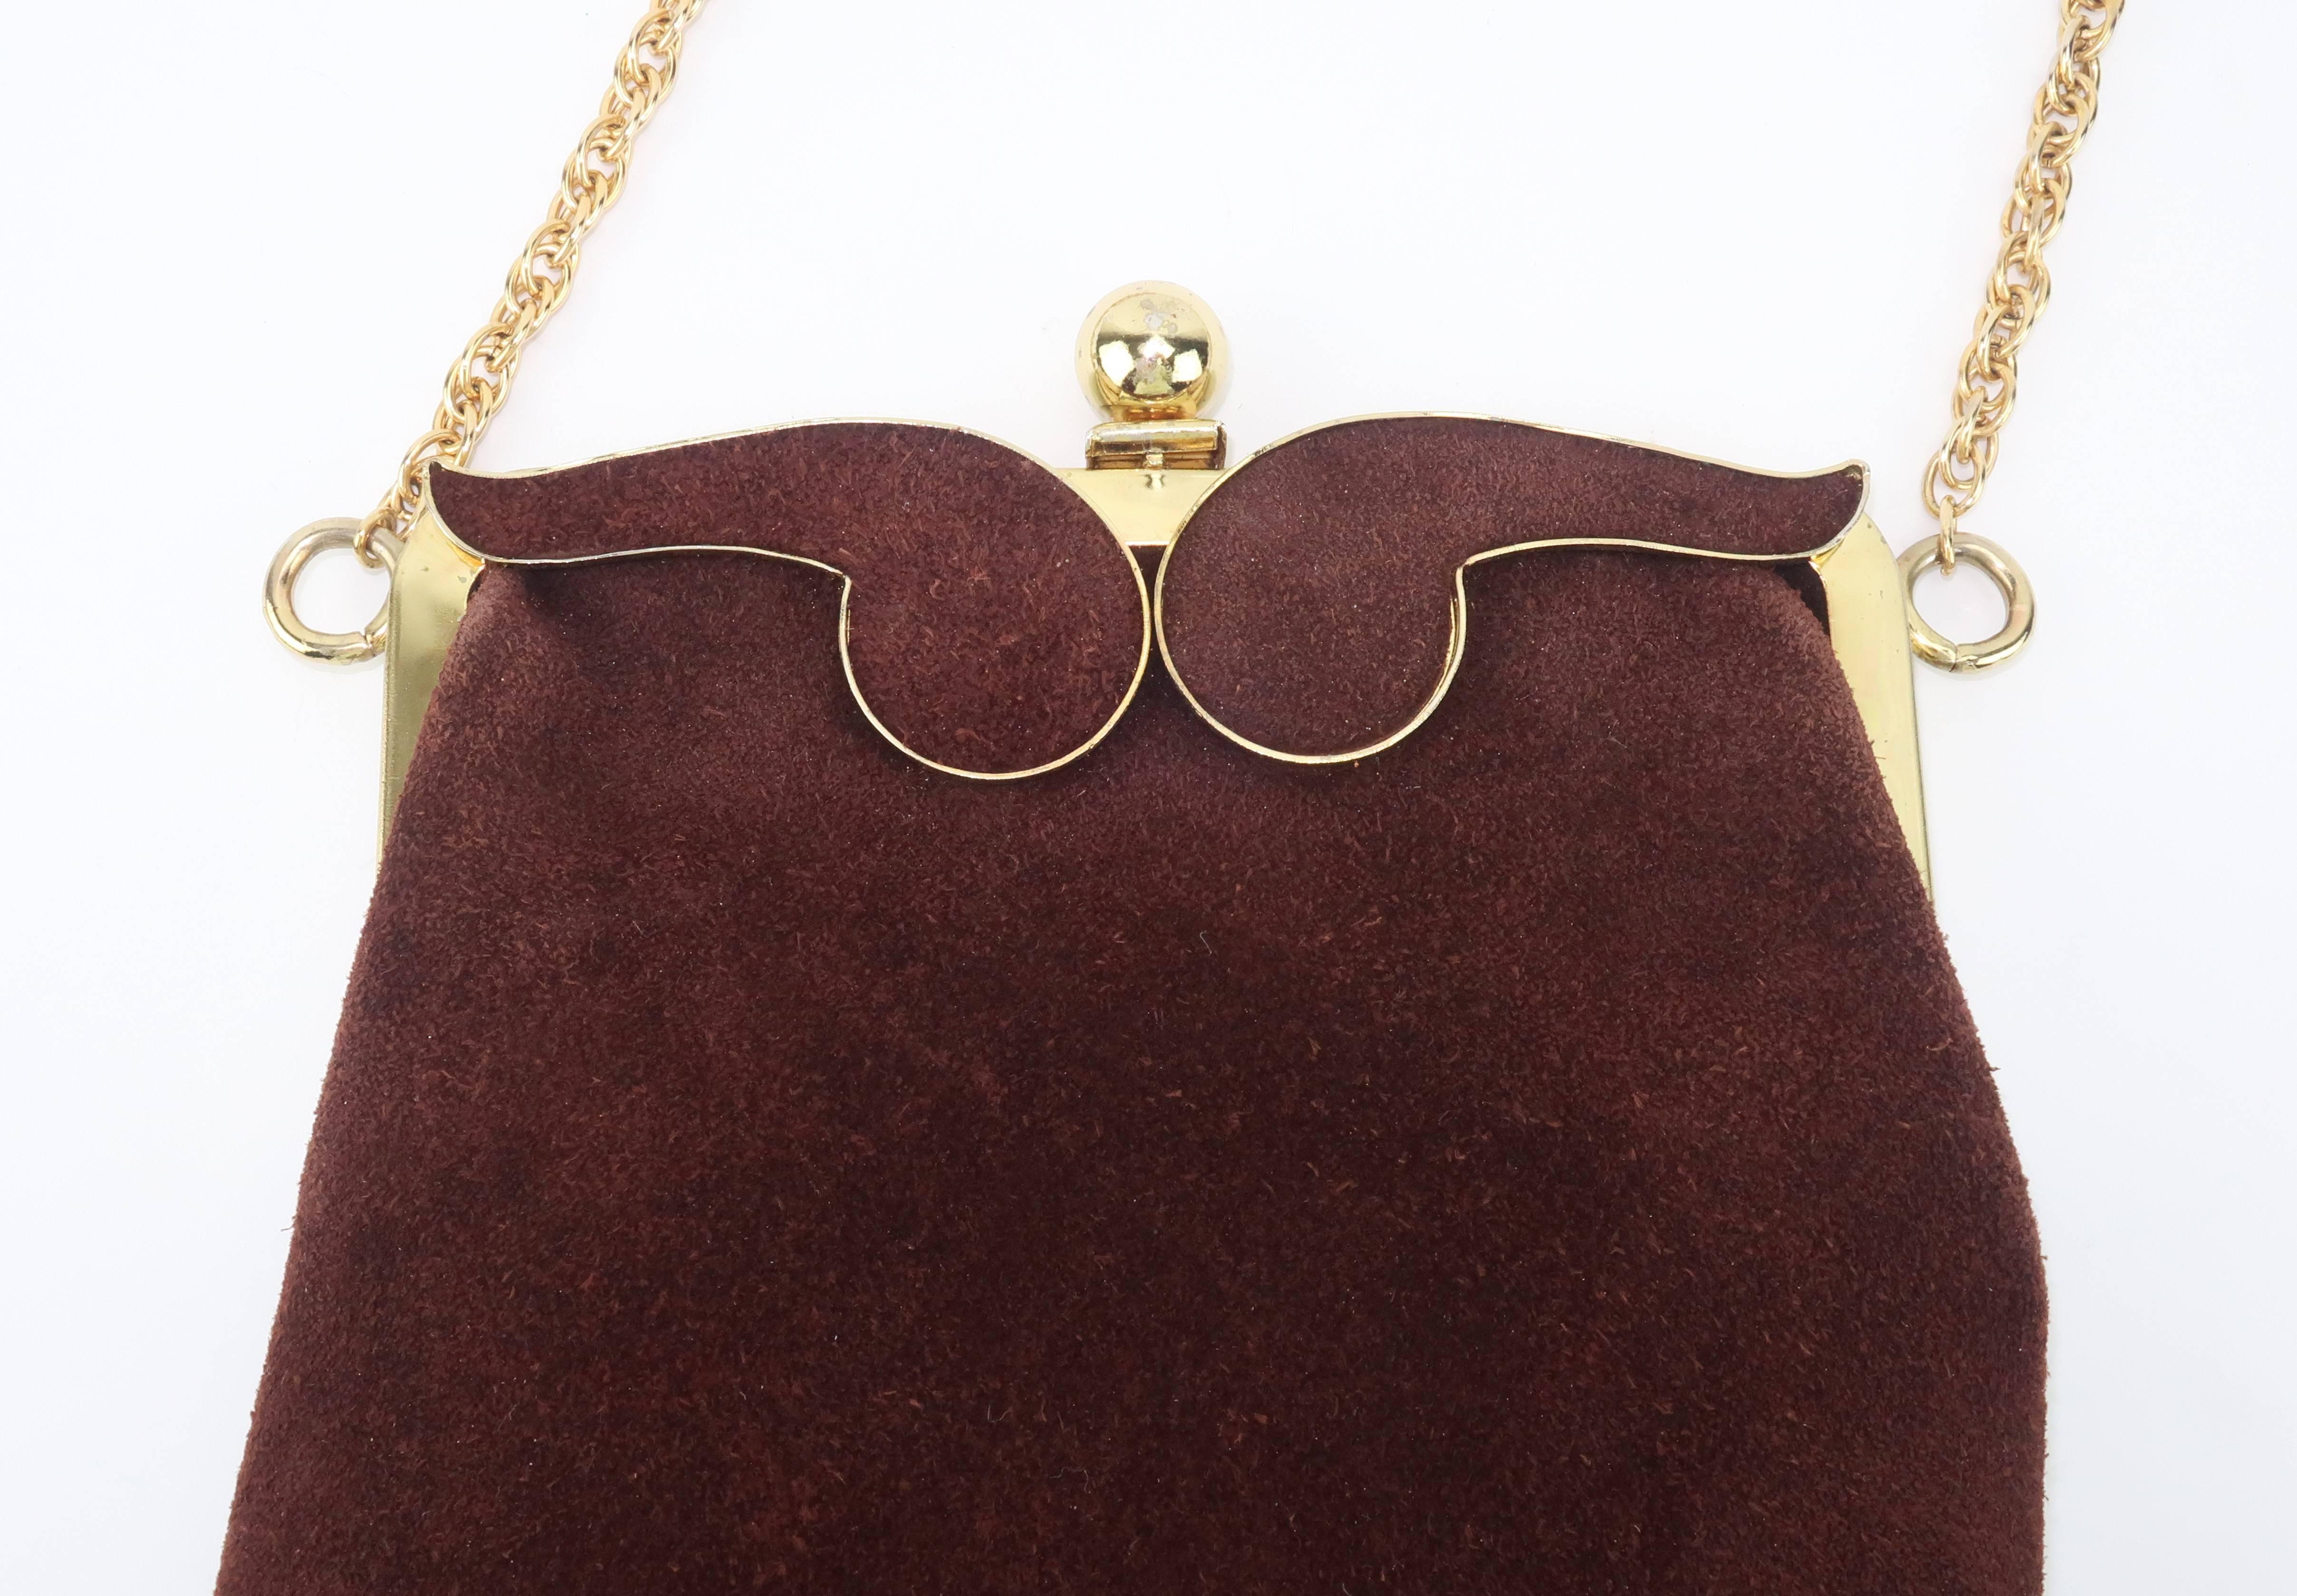 Black 1960's Brown Suede Leather Handbag With Gold Chain Shoulder Handle